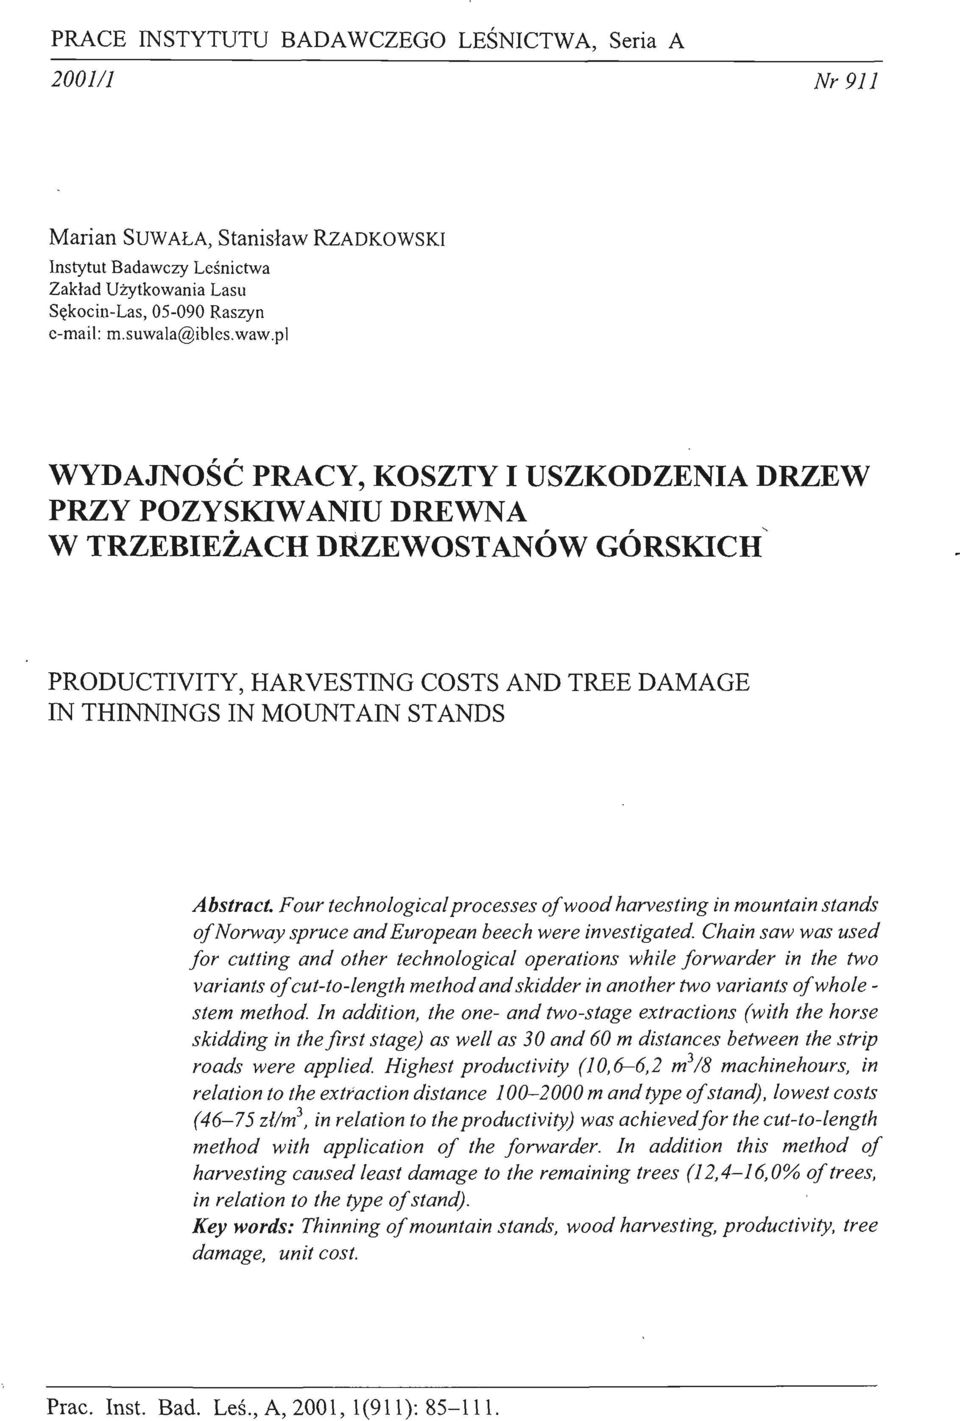 , DREWNA " W TRZEBIEZACH DRZEWOSTANOW GORSKICH PRODUCTIVITY, HARVESTING COSTS AND TREE DAMAGE IN THINNINGS IN MOUNTAIN STANDS Abstraet.